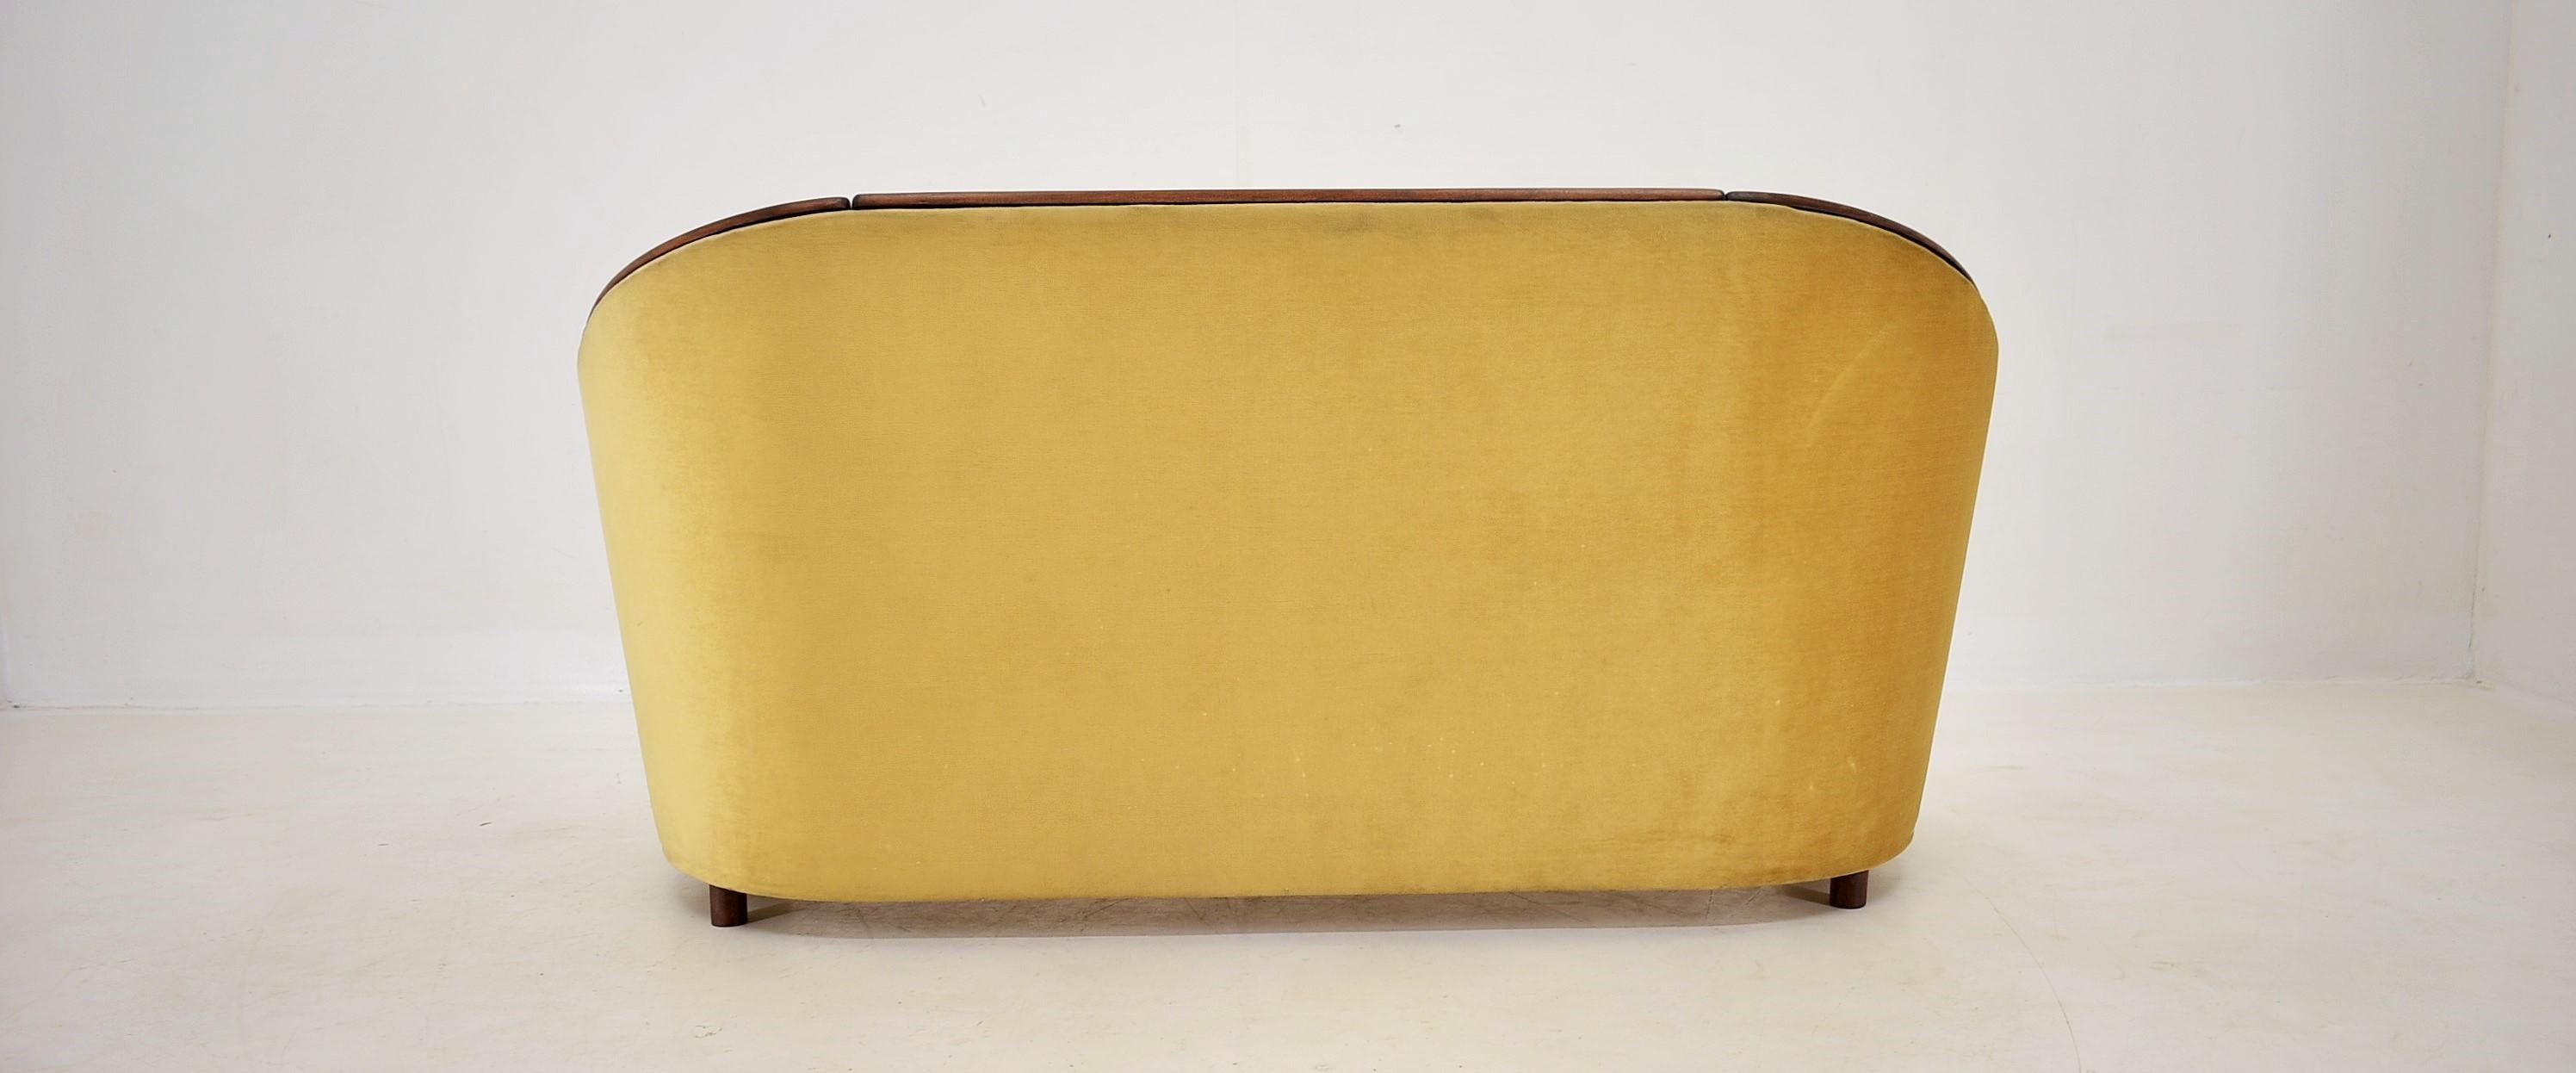 Italian 2-Seat Sofa in the Style of Gio Ponti, 1950s For Sale 7